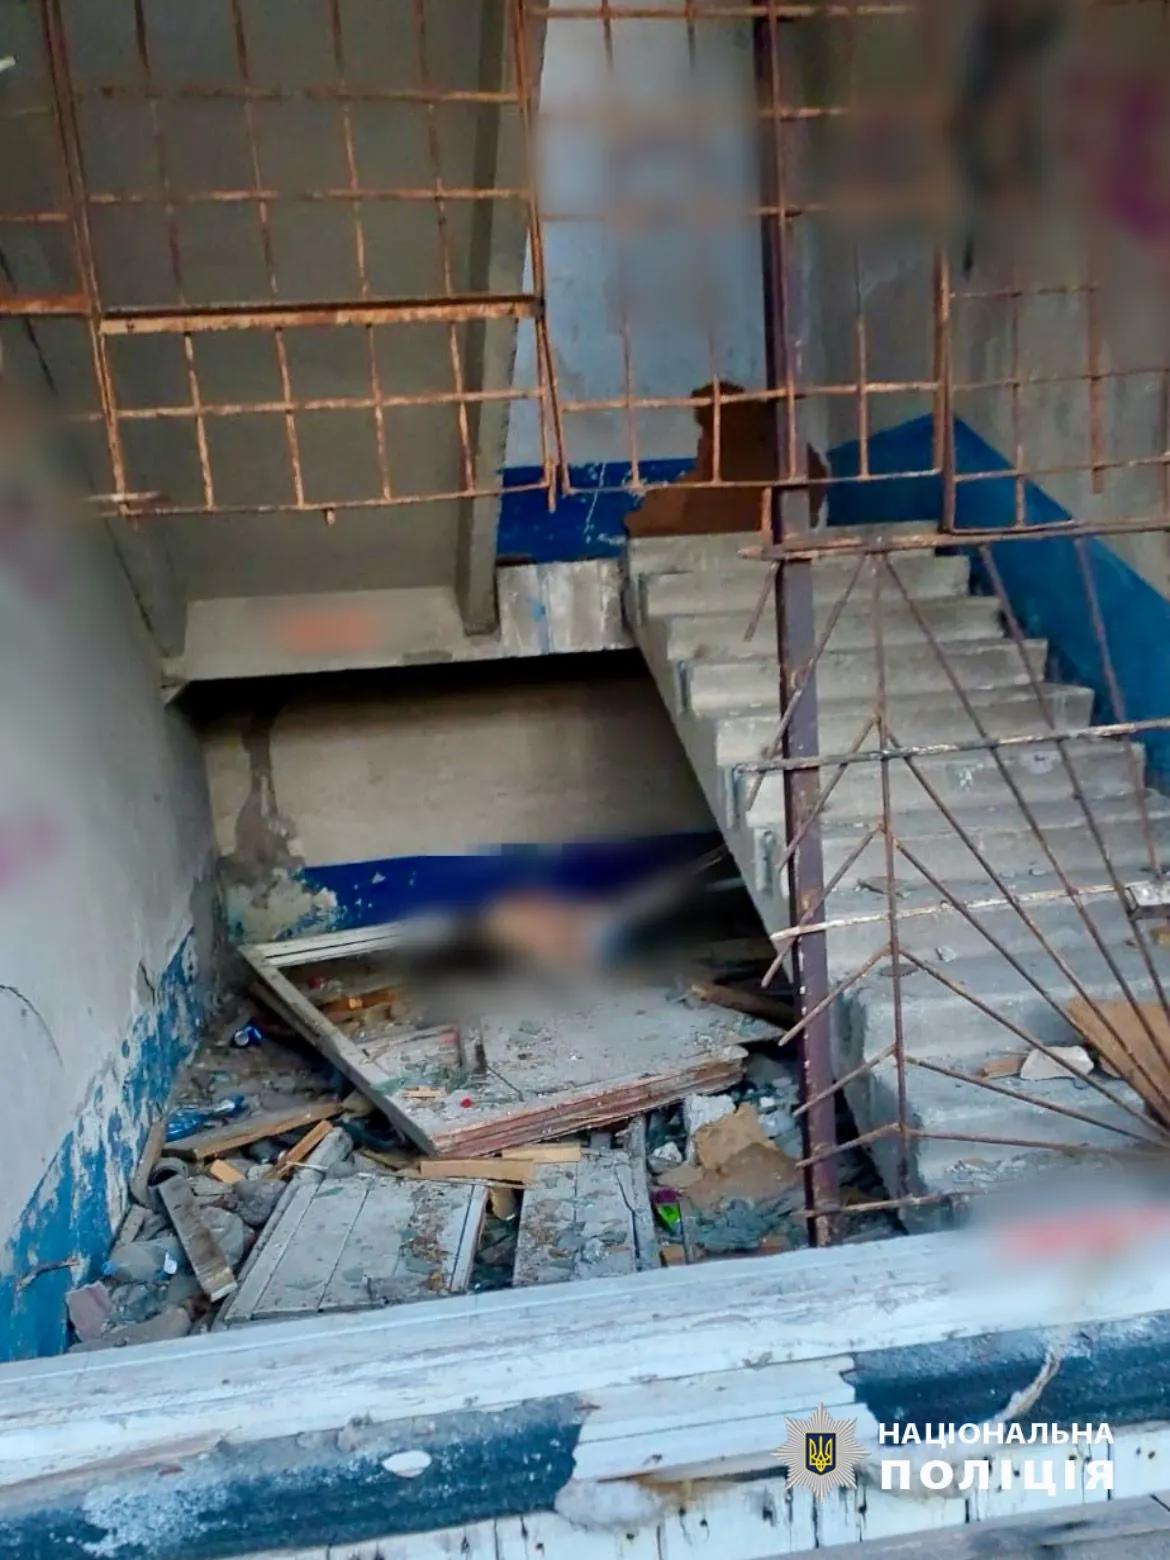 she-painted-on-the-walls-between-the-fourteenth-and-fifteenth-floors-a-13-year-old-girl-died-in-odesa-after-falling-from-a-height-in-an-abandoned-sanatorium